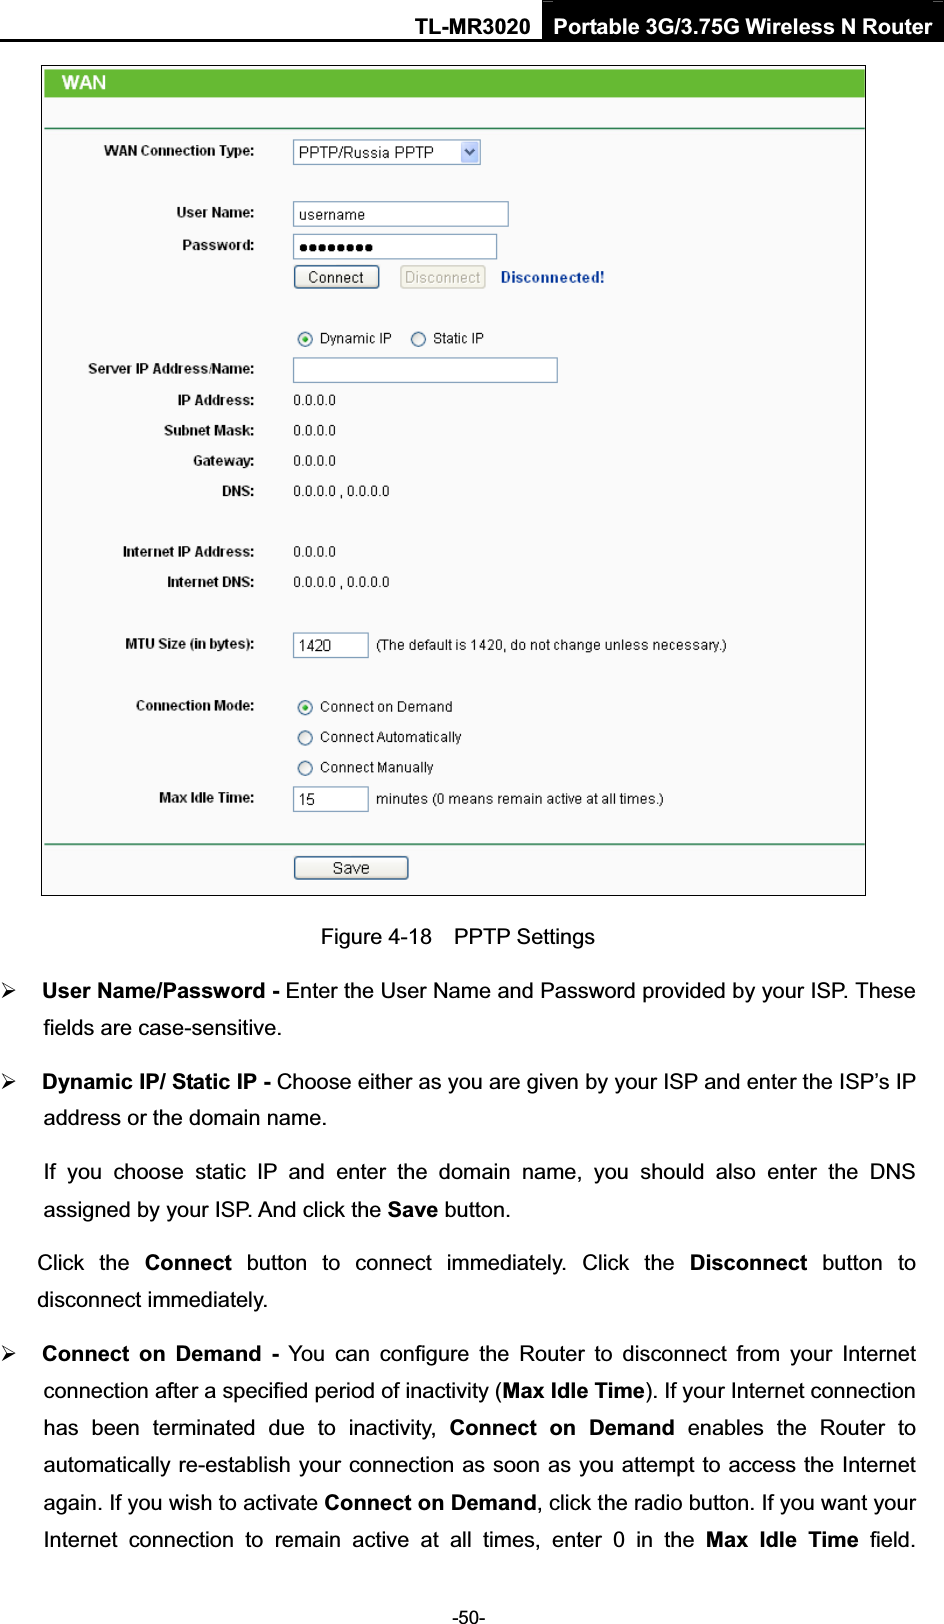 TL-MR3020 Portable 3G/3.75G Wireless N Router-50-Figure 4-18    PPTP Settings¾User Name/Password - Enter the User Name and Password provided by your ISP. These fields are case-sensitive. ¾Dynamic IP/ Static IP - Choose either as you are given by your ISP and enter the ISP’s IP address or the domain name. If  you  choose  static  IP  and  enter  the  domain  name,  you  should  also  enter  the  DNS assigned by your ISP. And click the Save button.Click  the  Connect  button  to  connect  immediately.  Click  the  Disconnect  button  to disconnect immediately. ¾Connect  on  Demand  -  You  can  configure  the  Router  to  disconnect  from  your  Internet connection after a specified period of inactivity (Max Idle Time). If your Internet connection has  been  terminated  due  to  inactivity,  Connect  on  Demand  enables  the  Router  to automatically re-establish your connection as soon as you attempt to access the Internet again. If you wish to activate Connect on Demand, click the radio button. If you want your Internet  connection  to  remain  active  at  all  times,  enter  0  in  the  Max  Idle  Time  field. 